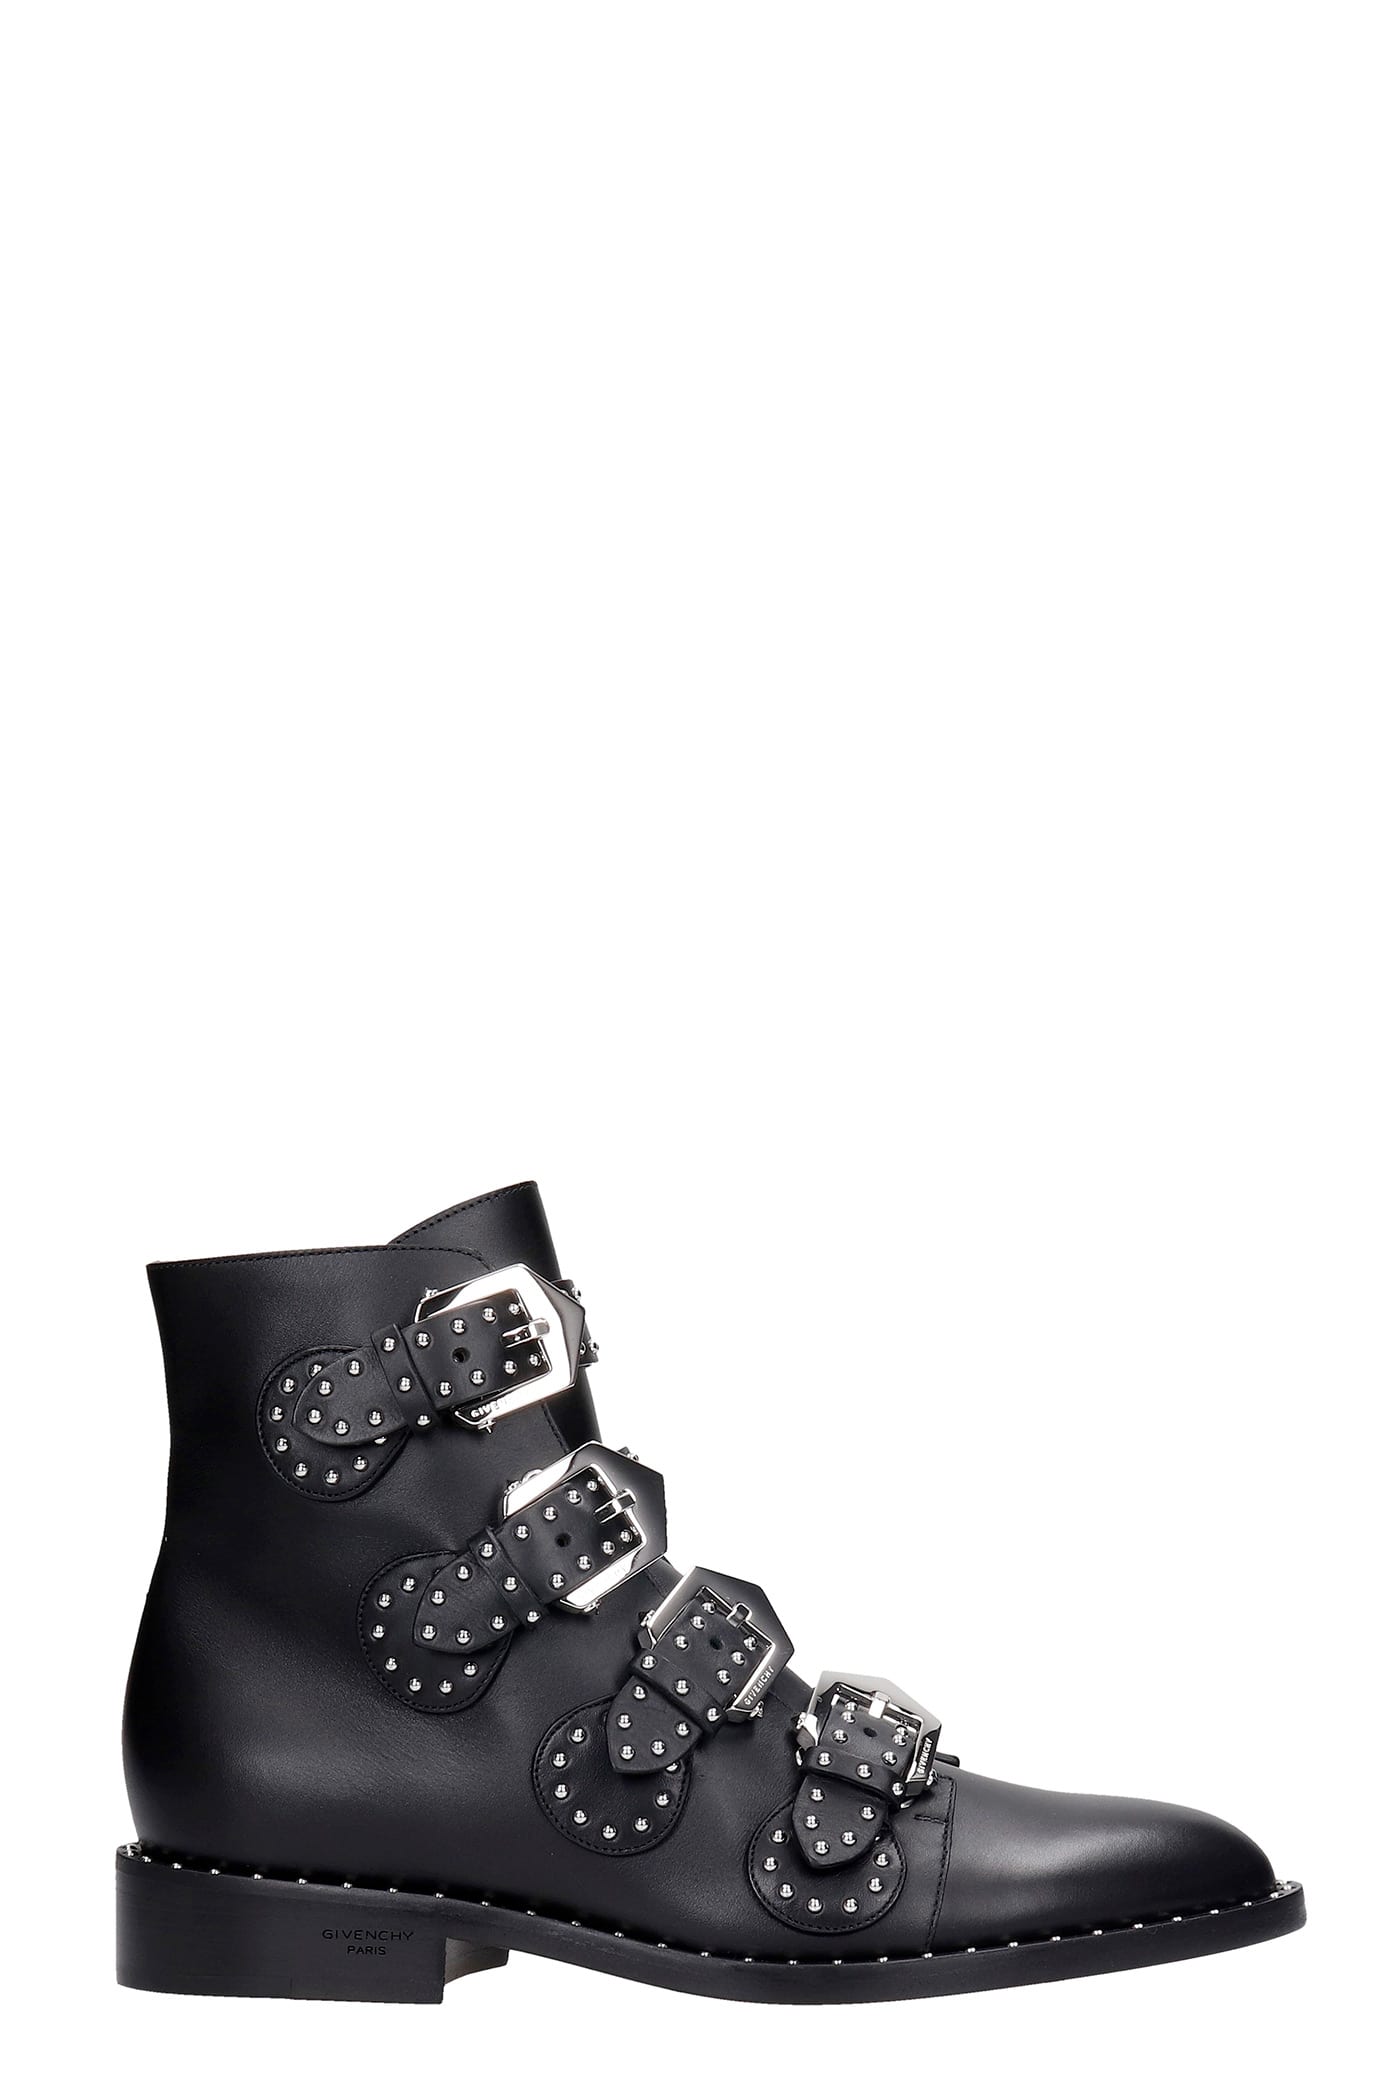 Buy Givenchy Low Heels Ankle Boots In Black Leather online, shop Givenchy shoes with free shipping